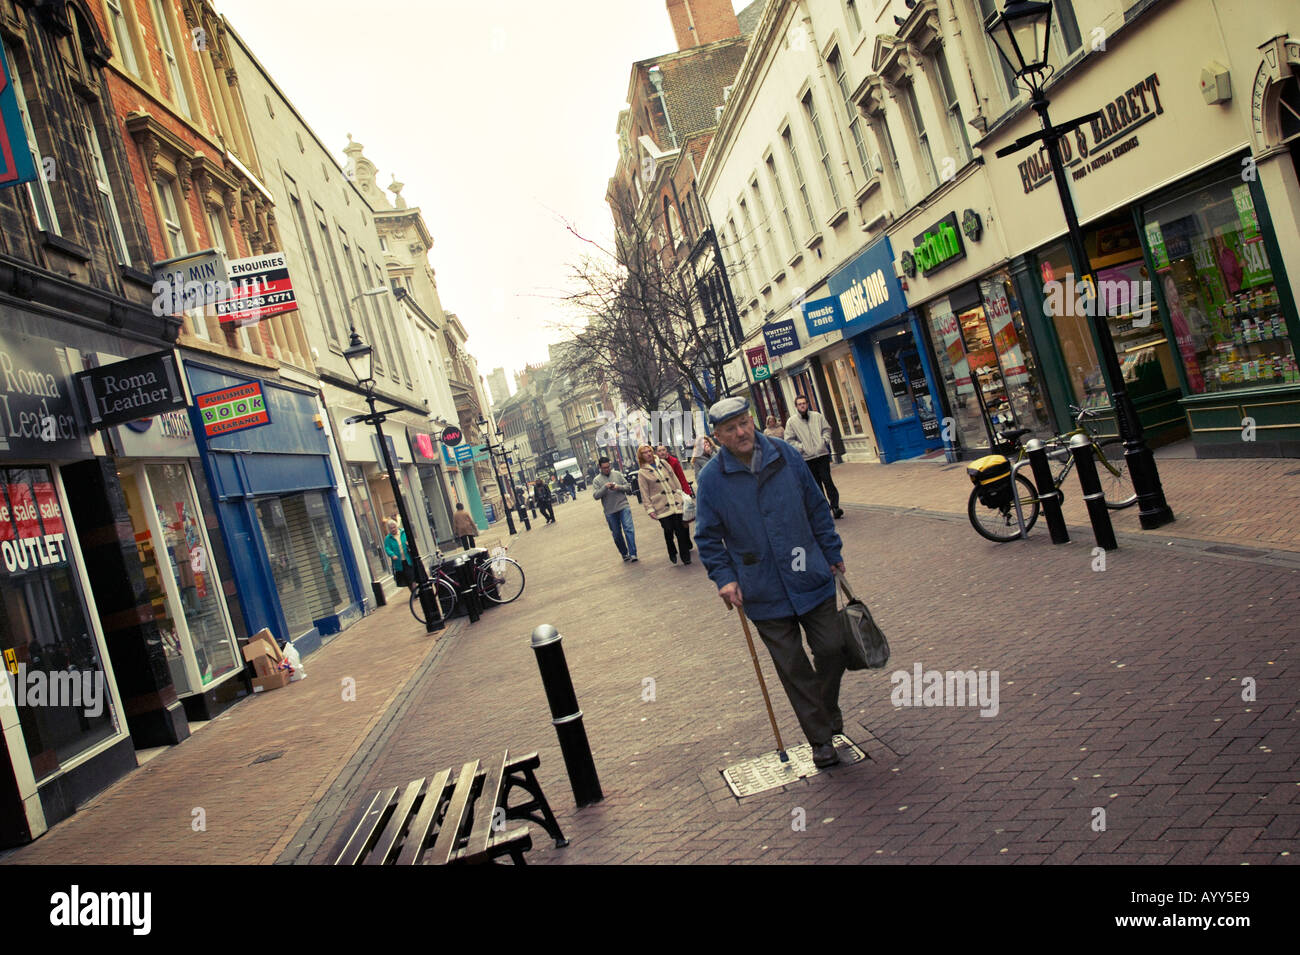 Whitefriargate in Hull City Centre, East Yorkshire, England, UK Stockfoto